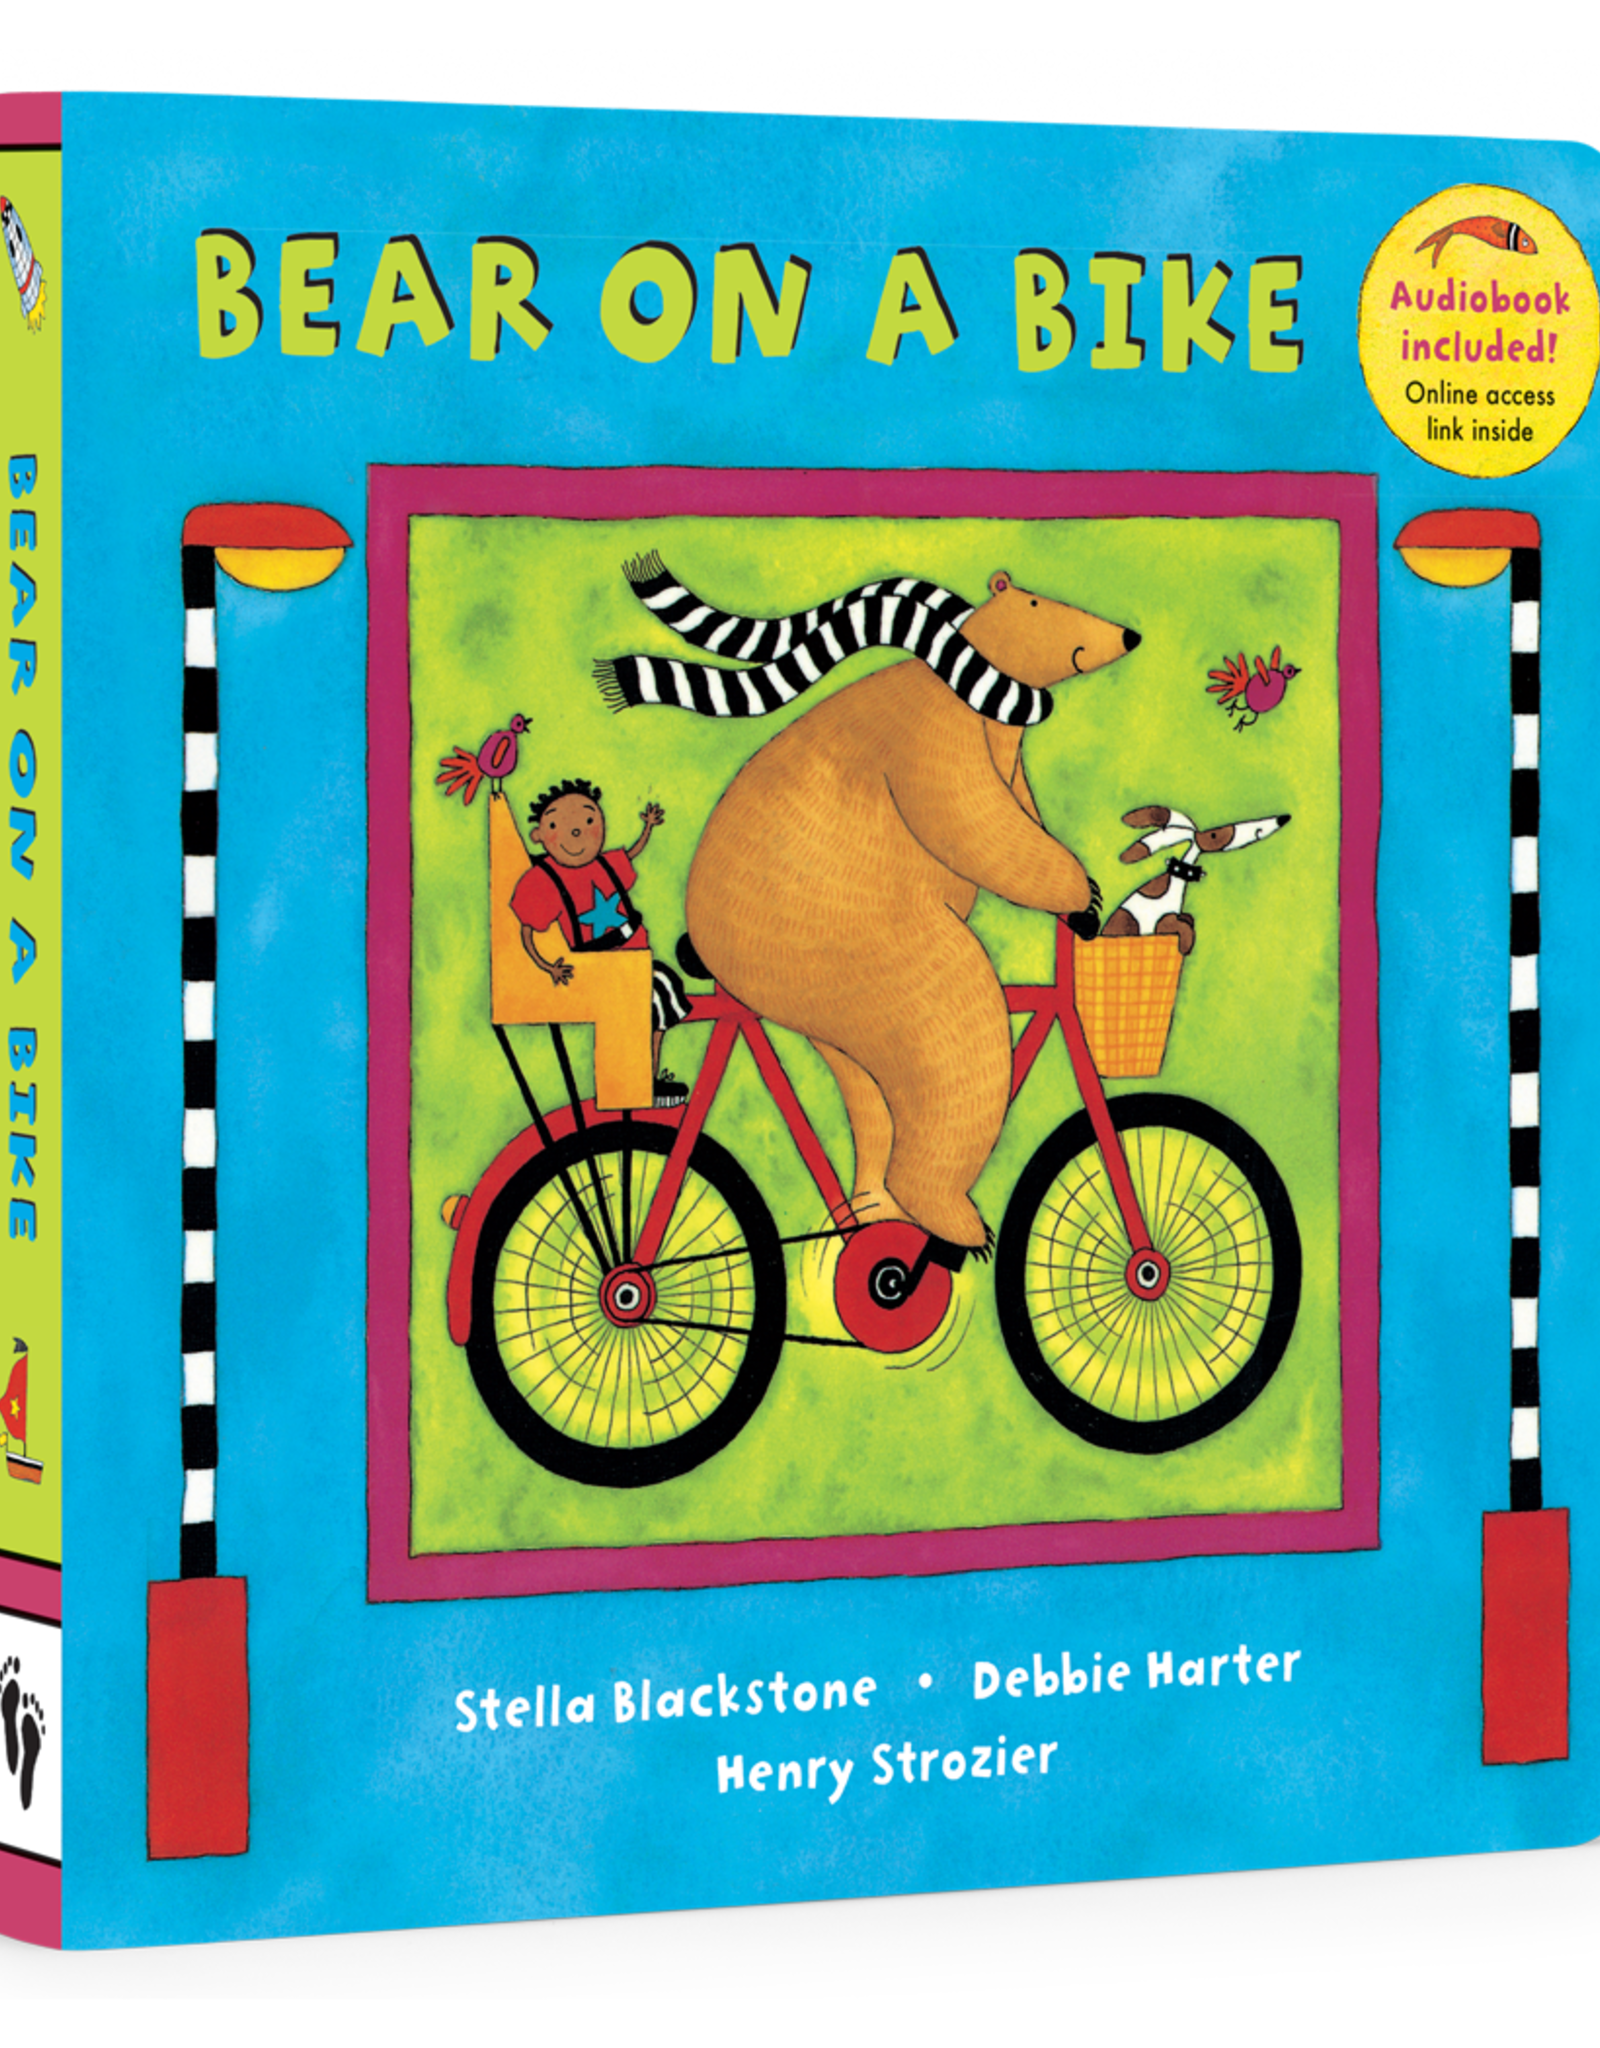 Copy of Bear in a Square by Stella Blackstone,  Debbie Harter and Henry Strozier